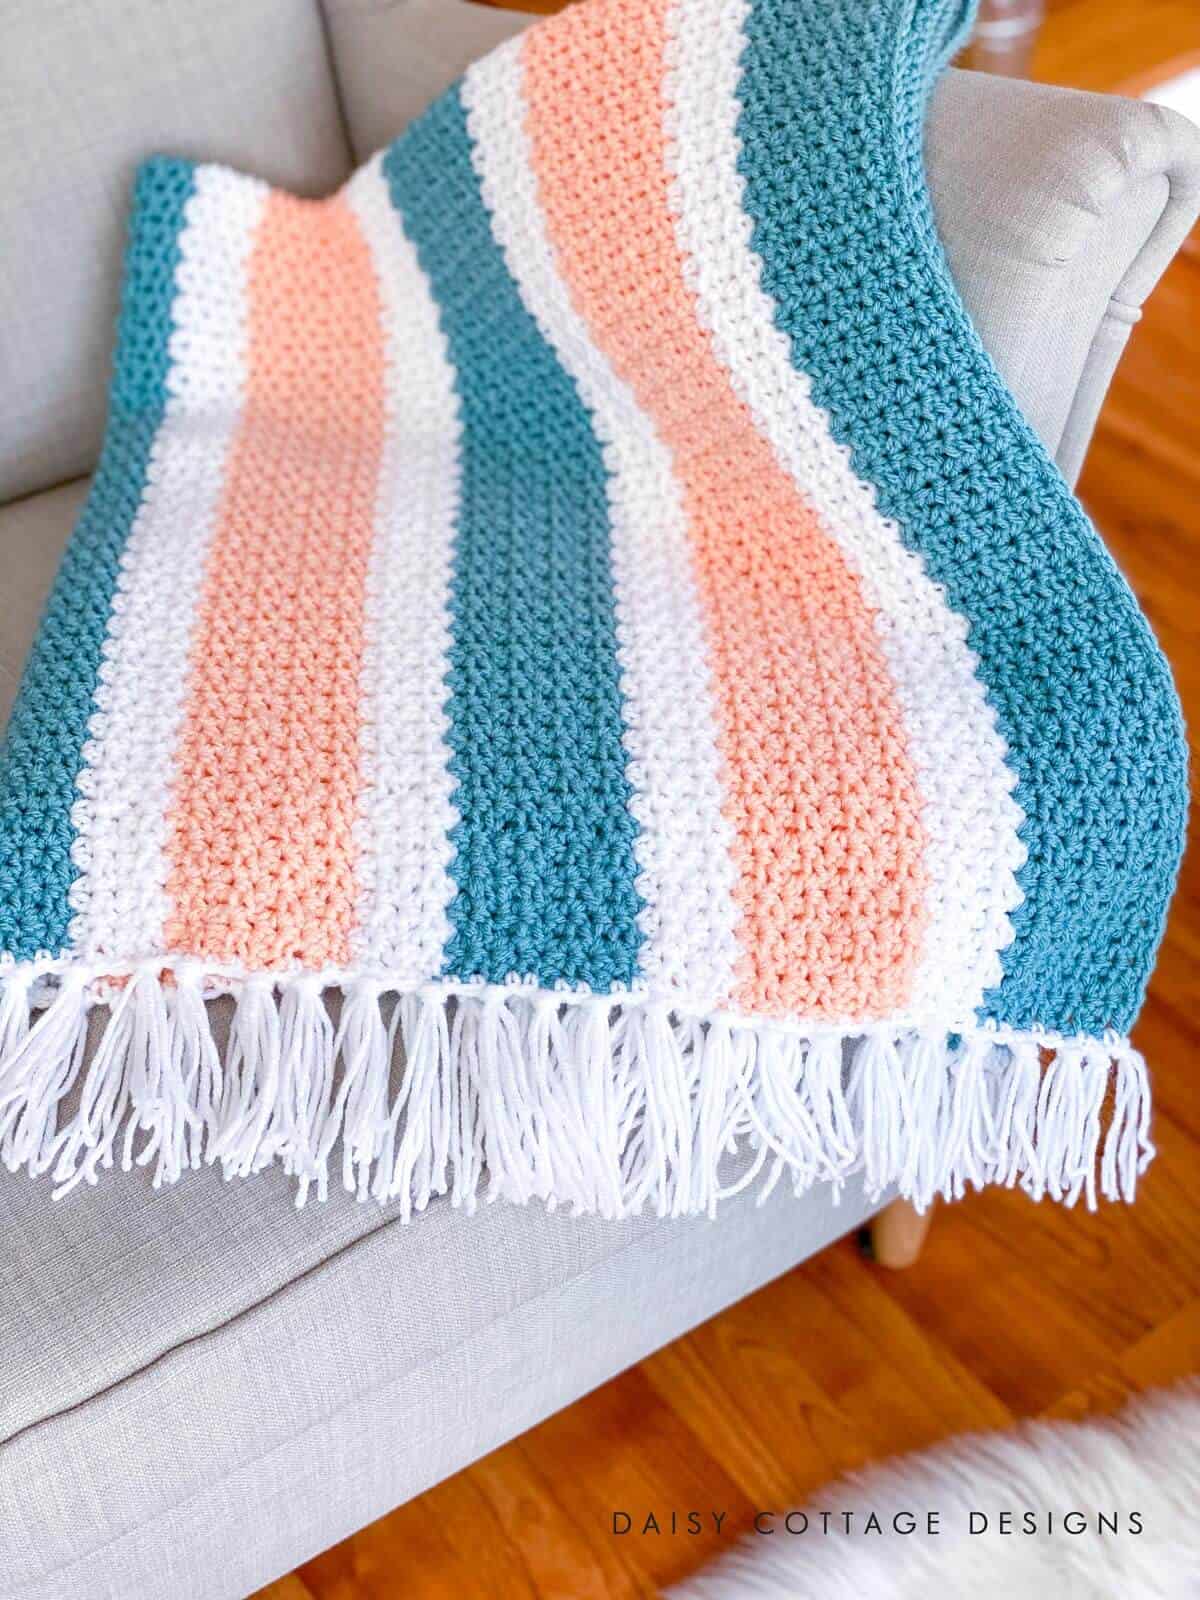 V Stitch Crochet at its finest! Learn how to create this gorgeous crochet blanket using use this quick and easy free crochet pattern.